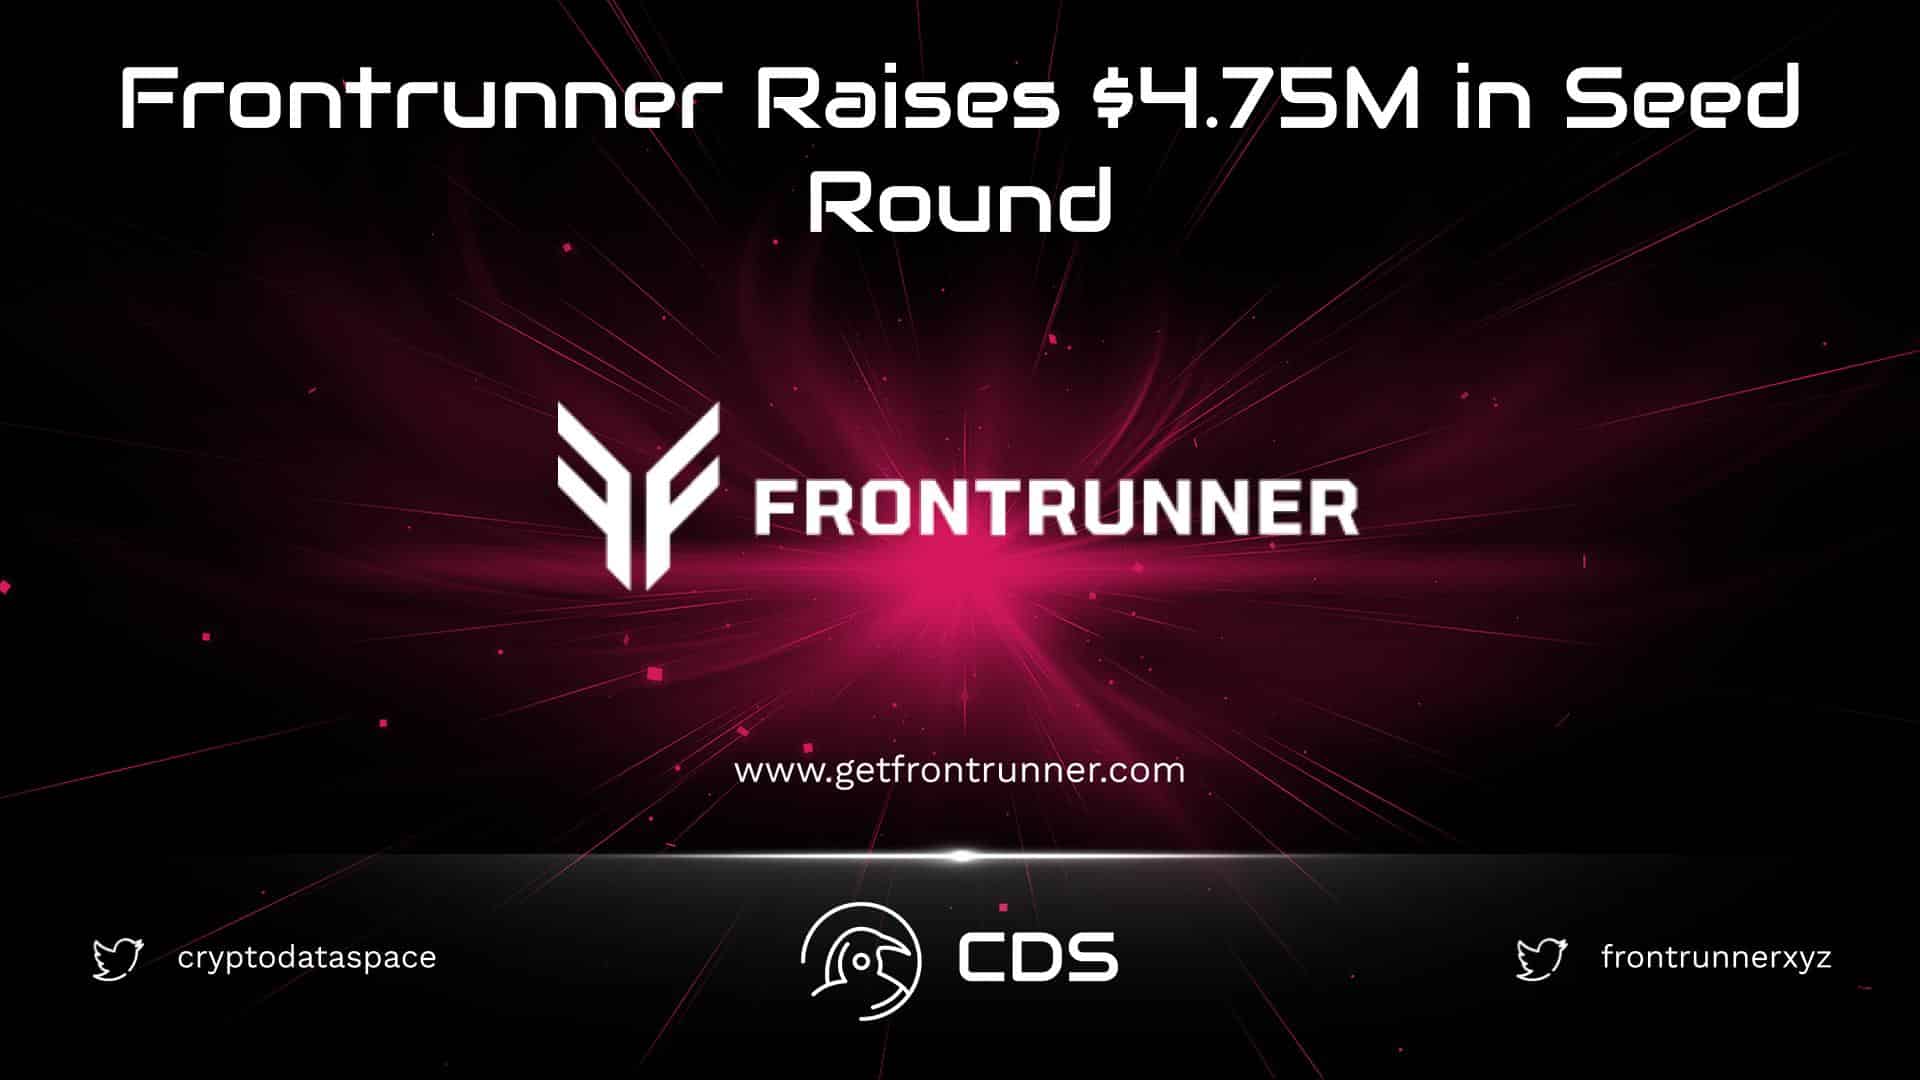 Frontrunner Raises $4.75M in Seed Round